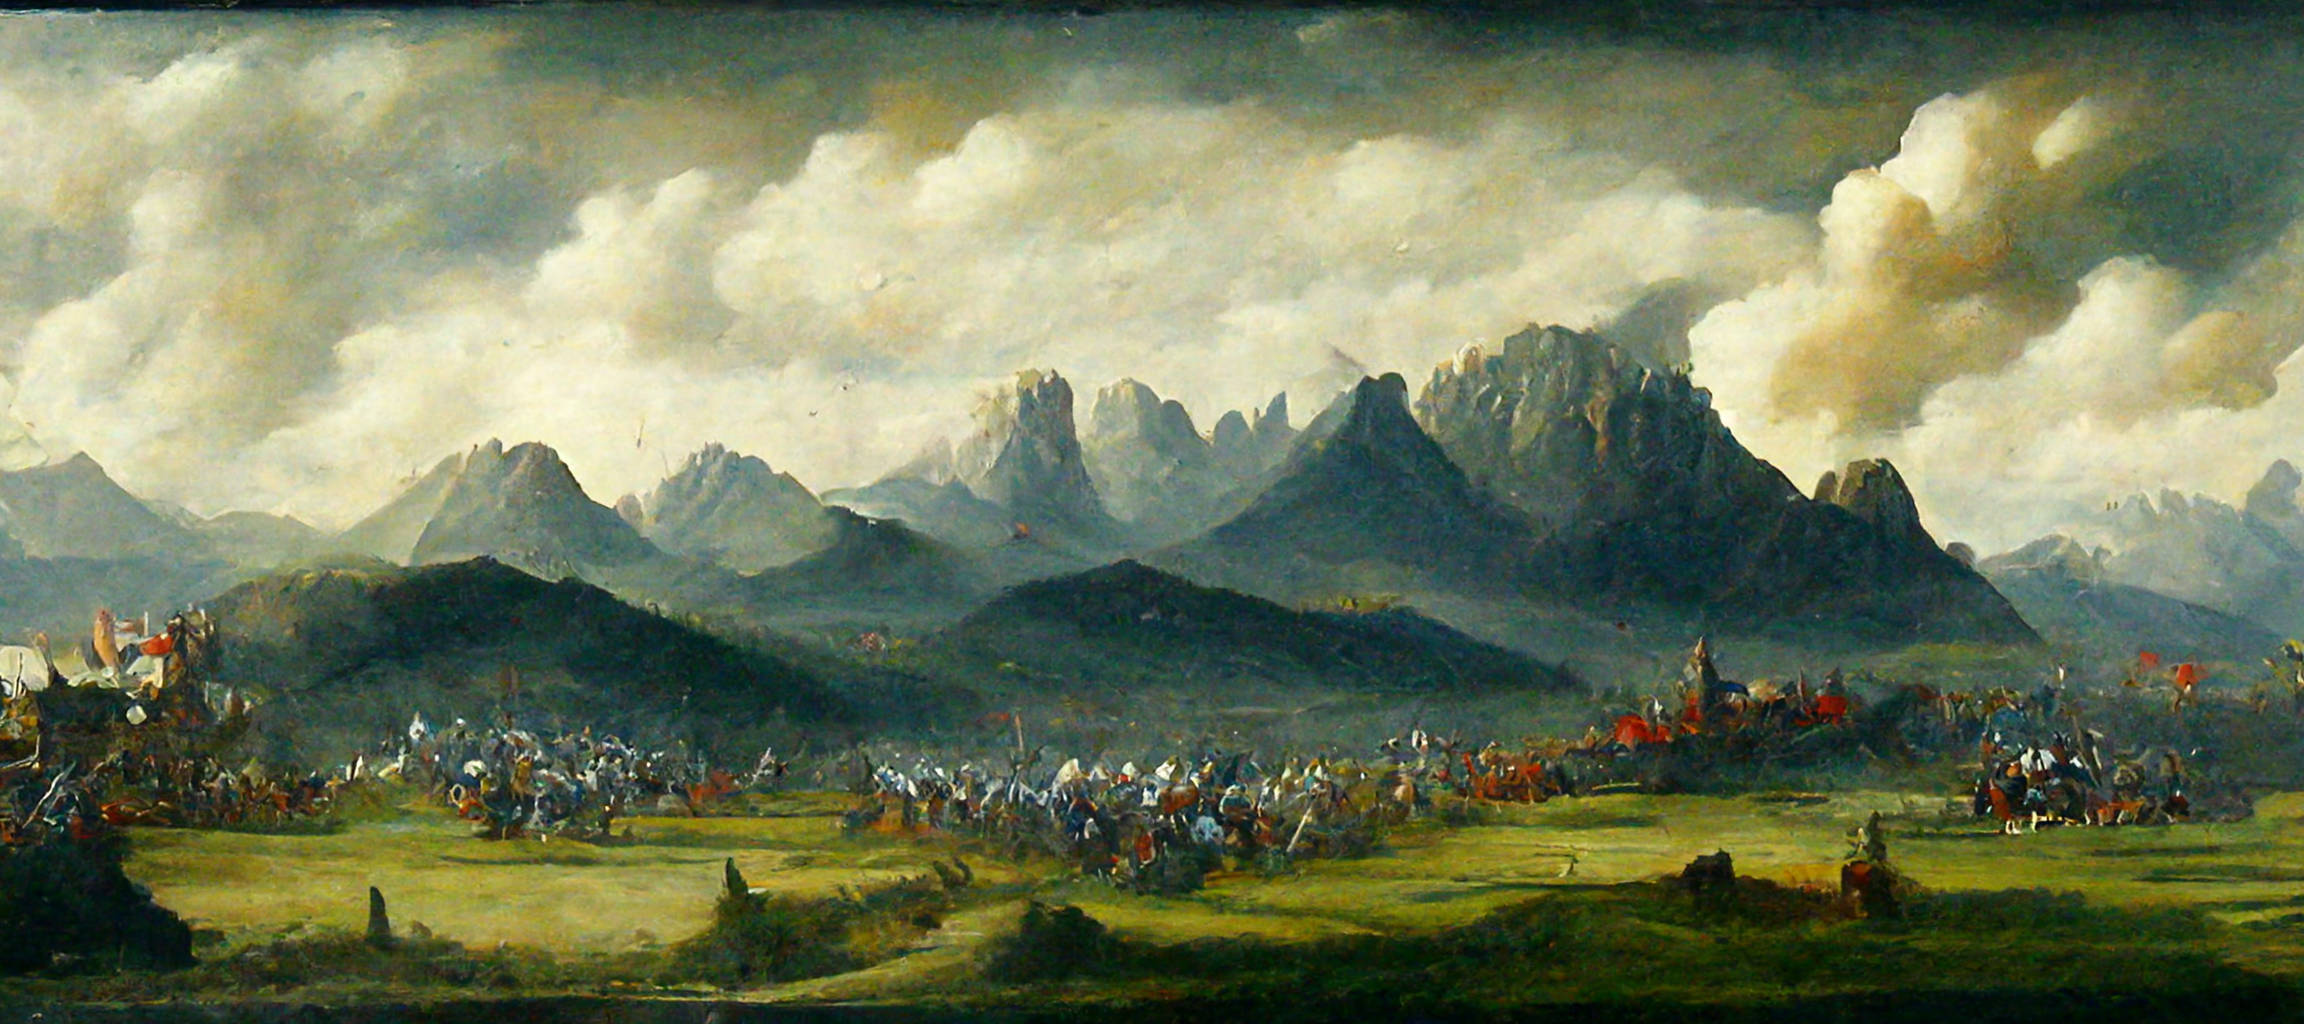 Digital painting style of a mountain landscape and a battle on the grasslands